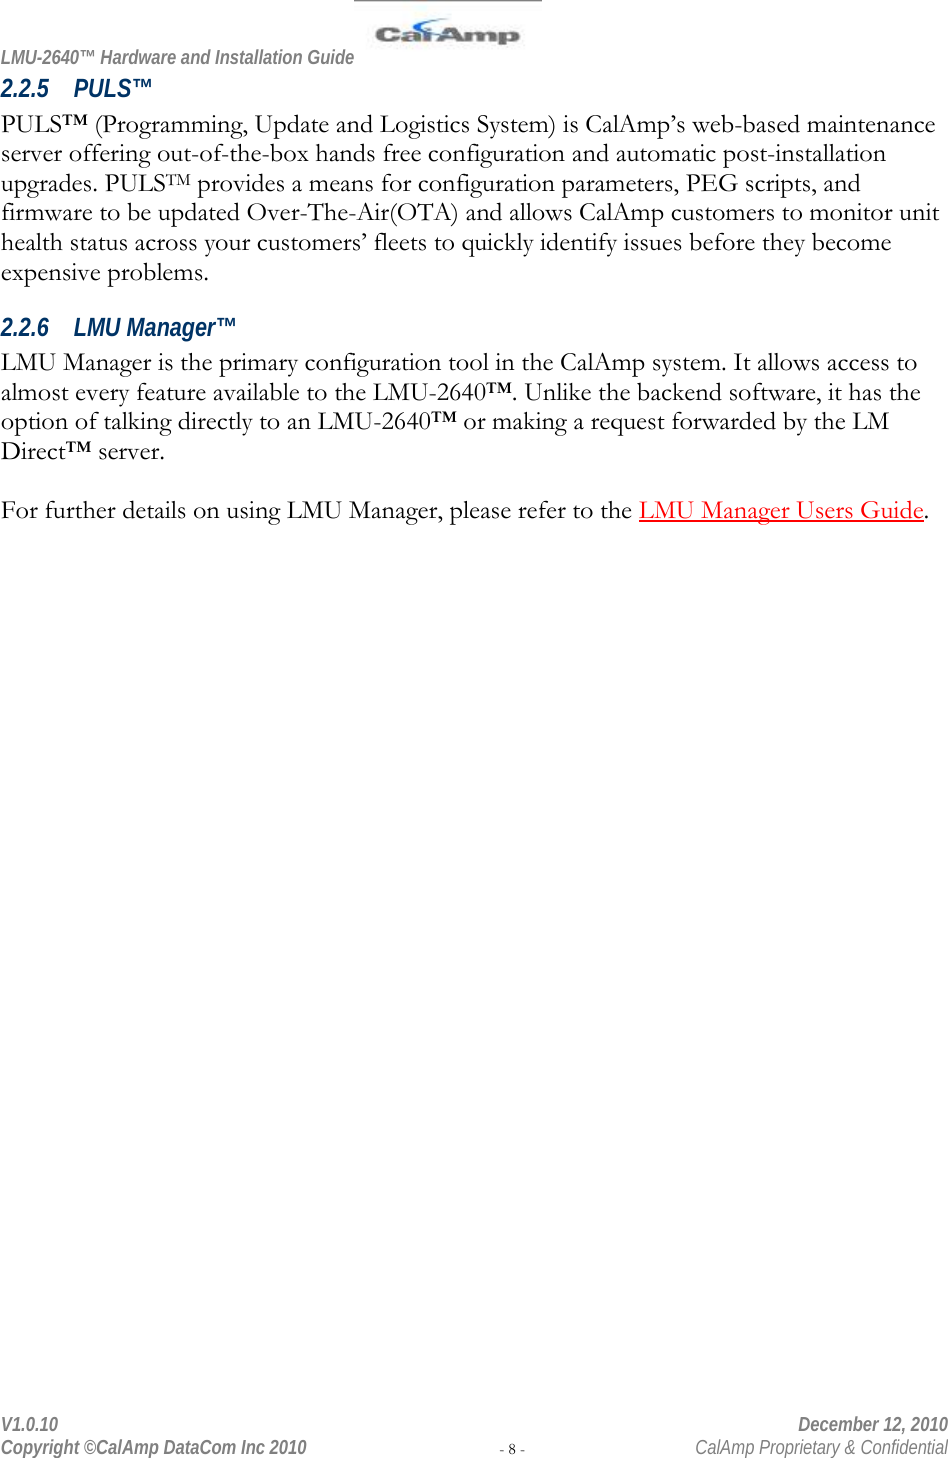 LMU-2640™ Hardware and Installation Guide  V1.0.10    December 12, 2010 Copyright ©CalAmp DataCom Inc 2010 - 8 -  CalAmp Proprietary &amp; Confidential 2.2.5 PULS™ PULS™ (Programming, Update and Logistics System) is CalAmp’s web-based maintenance server offering out-of-the-box hands free configuration and automatic post-installation upgrades. PULSTM provides a means for configuration parameters, PEG scripts, and firmware to be updated Over-The-Air(OTA) and allows CalAmp customers to monitor unit health status across your customers’ fleets to quickly identify issues before they become expensive problems. 2.2.6 LMU Manager™ LMU Manager is the primary configuration tool in the CalAmp system. It allows access to almost every feature available to the LMU-2640™. Unlike the backend software, it has the option of talking directly to an LMU-2640™ or making a request forwarded by the LM Direct™ server.  For further details on using LMU Manager, please refer to the LMU Manager Users Guide. 